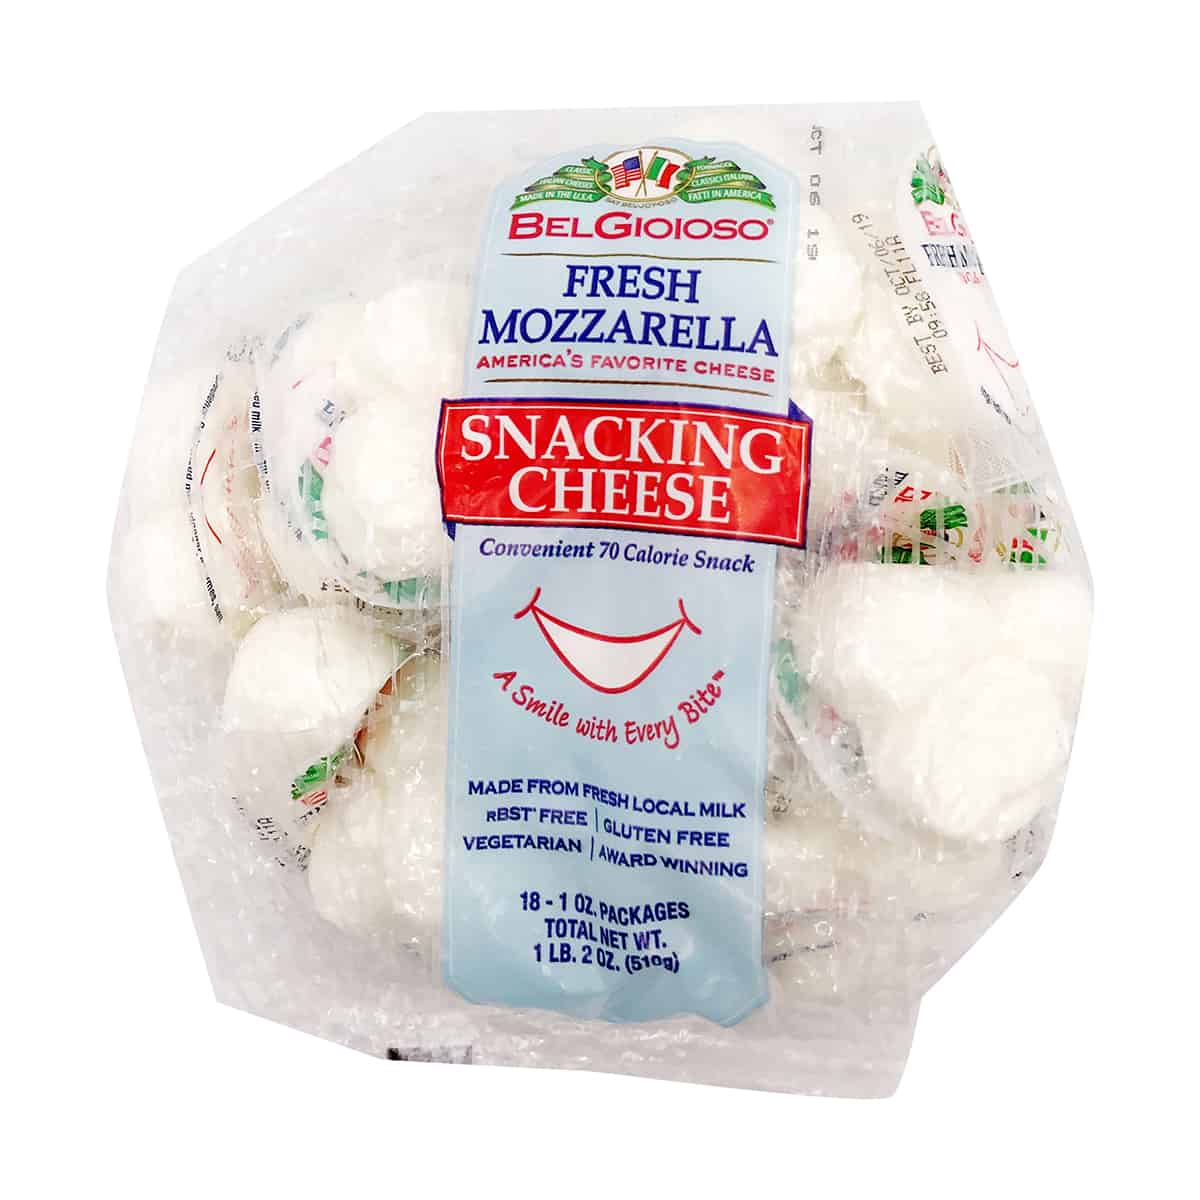 A package of fresh mozzarella snacking cheese. 